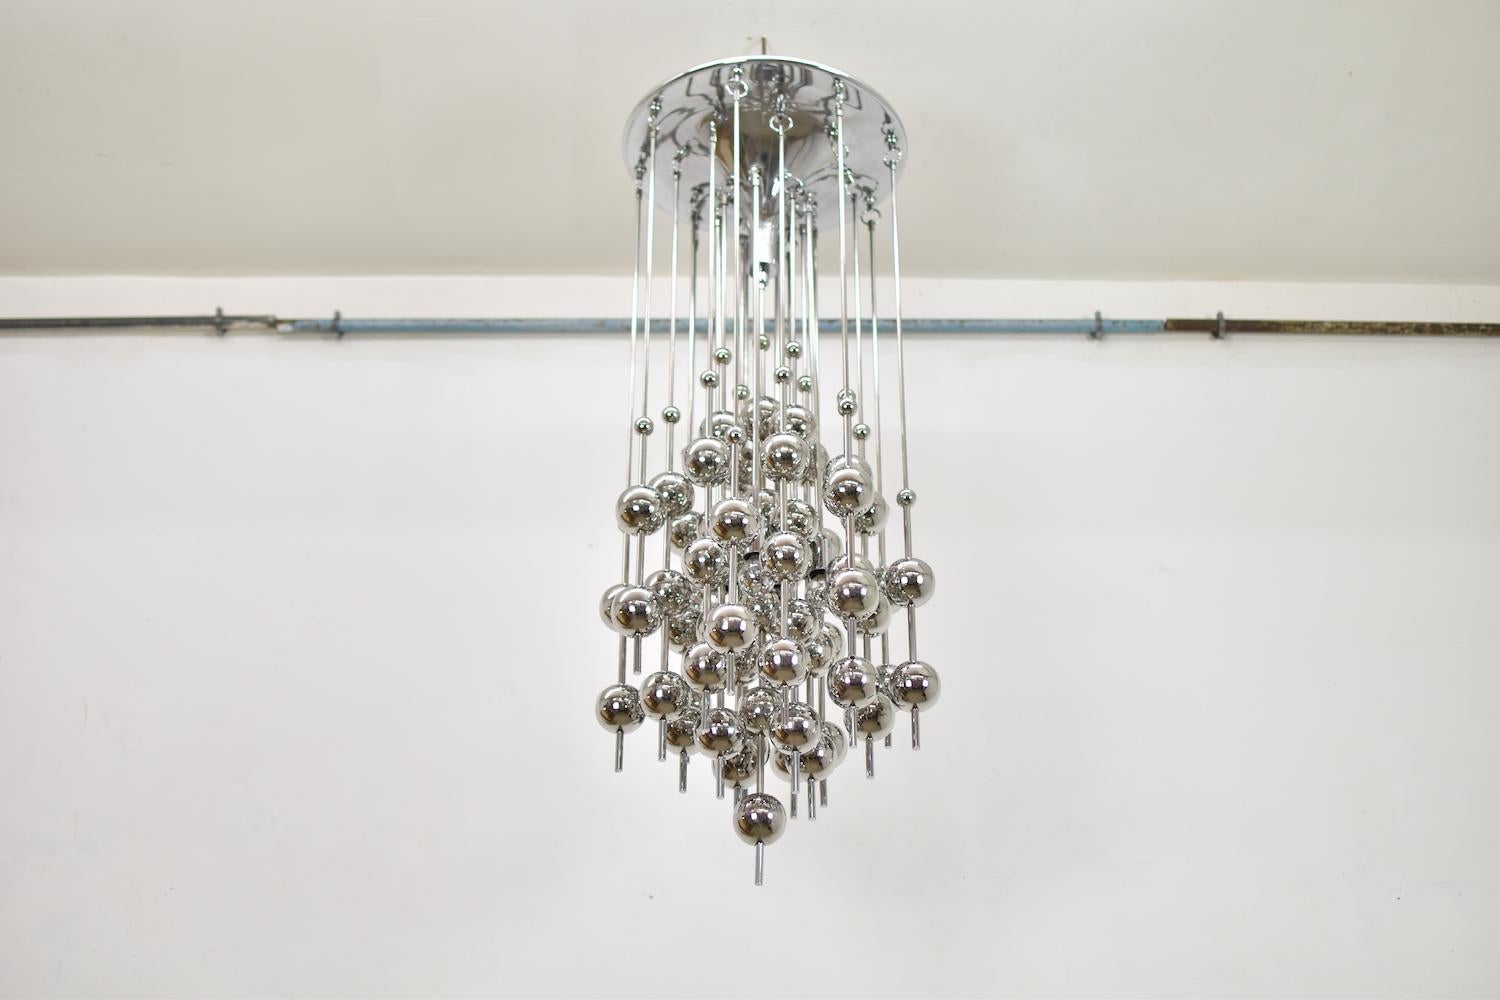 Rare pendant by Verner Panton for Lüber, Denmark, 1970s. This metallic pendant is formed from a series of chromed metal balls suspended from steel rods.